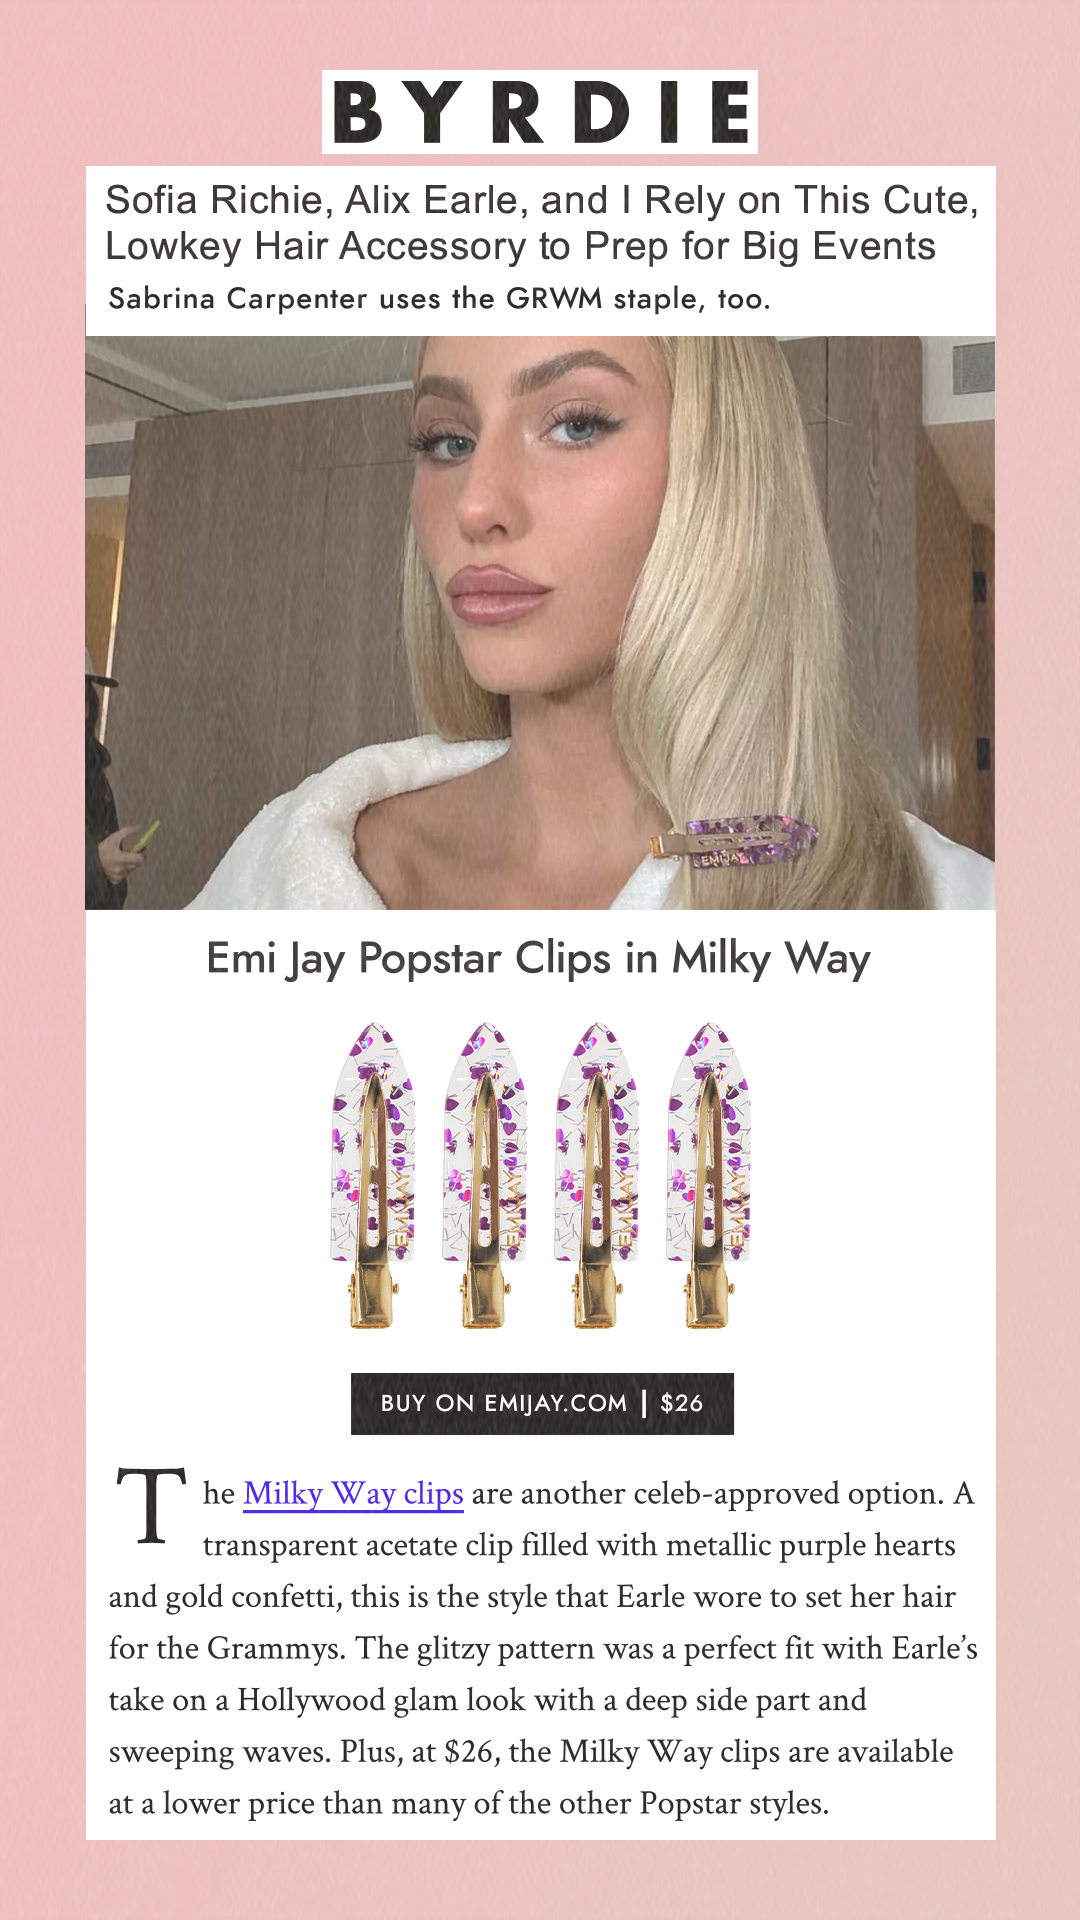 Sofia Richie, Alix Earle, and I Rely on This Cute, Lowkey Hair Accessory to Prep for Big Events Sabrina Carpenter uses the GRWM staple, too. Emi Jay Popstar Clips in Milky Way  Buy on Emijay.com $26 The Milky Way clips are another celeb-approved option. A transparent acetate clip filled with metallic purple hearts and gold confetti, this is the style that Earle wore to set her hair for the Grammys. The glitzy pattern was a perfect fit with Earle’s take on a Hollywood glam look with a deep side part and sweeping waves. Plus, at $26, the Milky Way clips are available at a lower price than many of the other Popstar styles.       